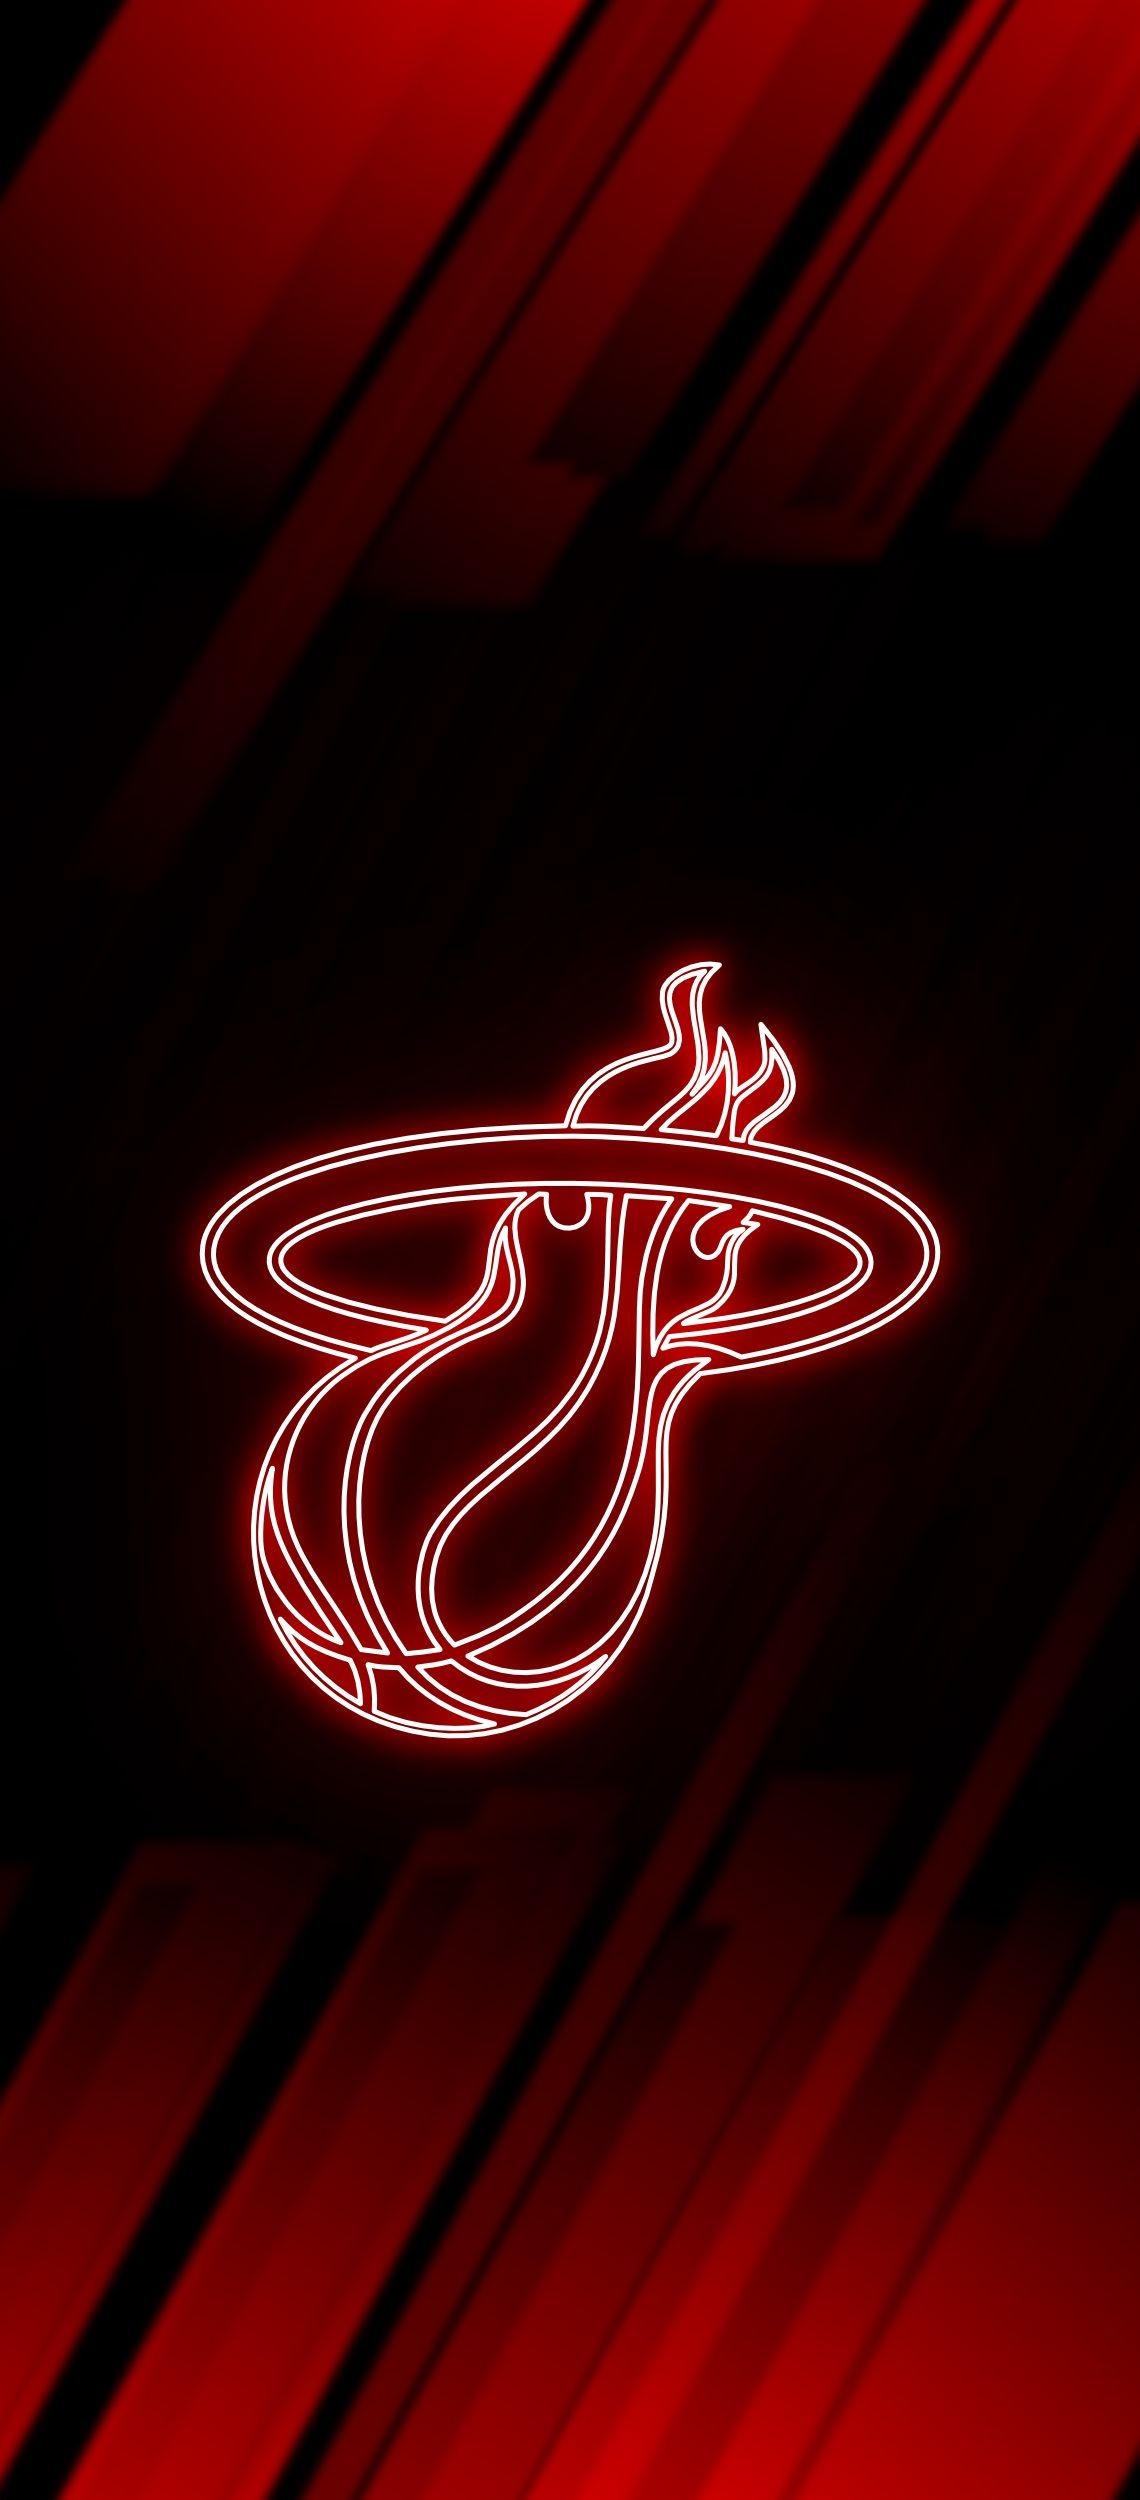 Miami Heat: The team was founded in 1988 as an expansion team and joined the NBA in 1989. 1140x2500 HD Wallpaper.